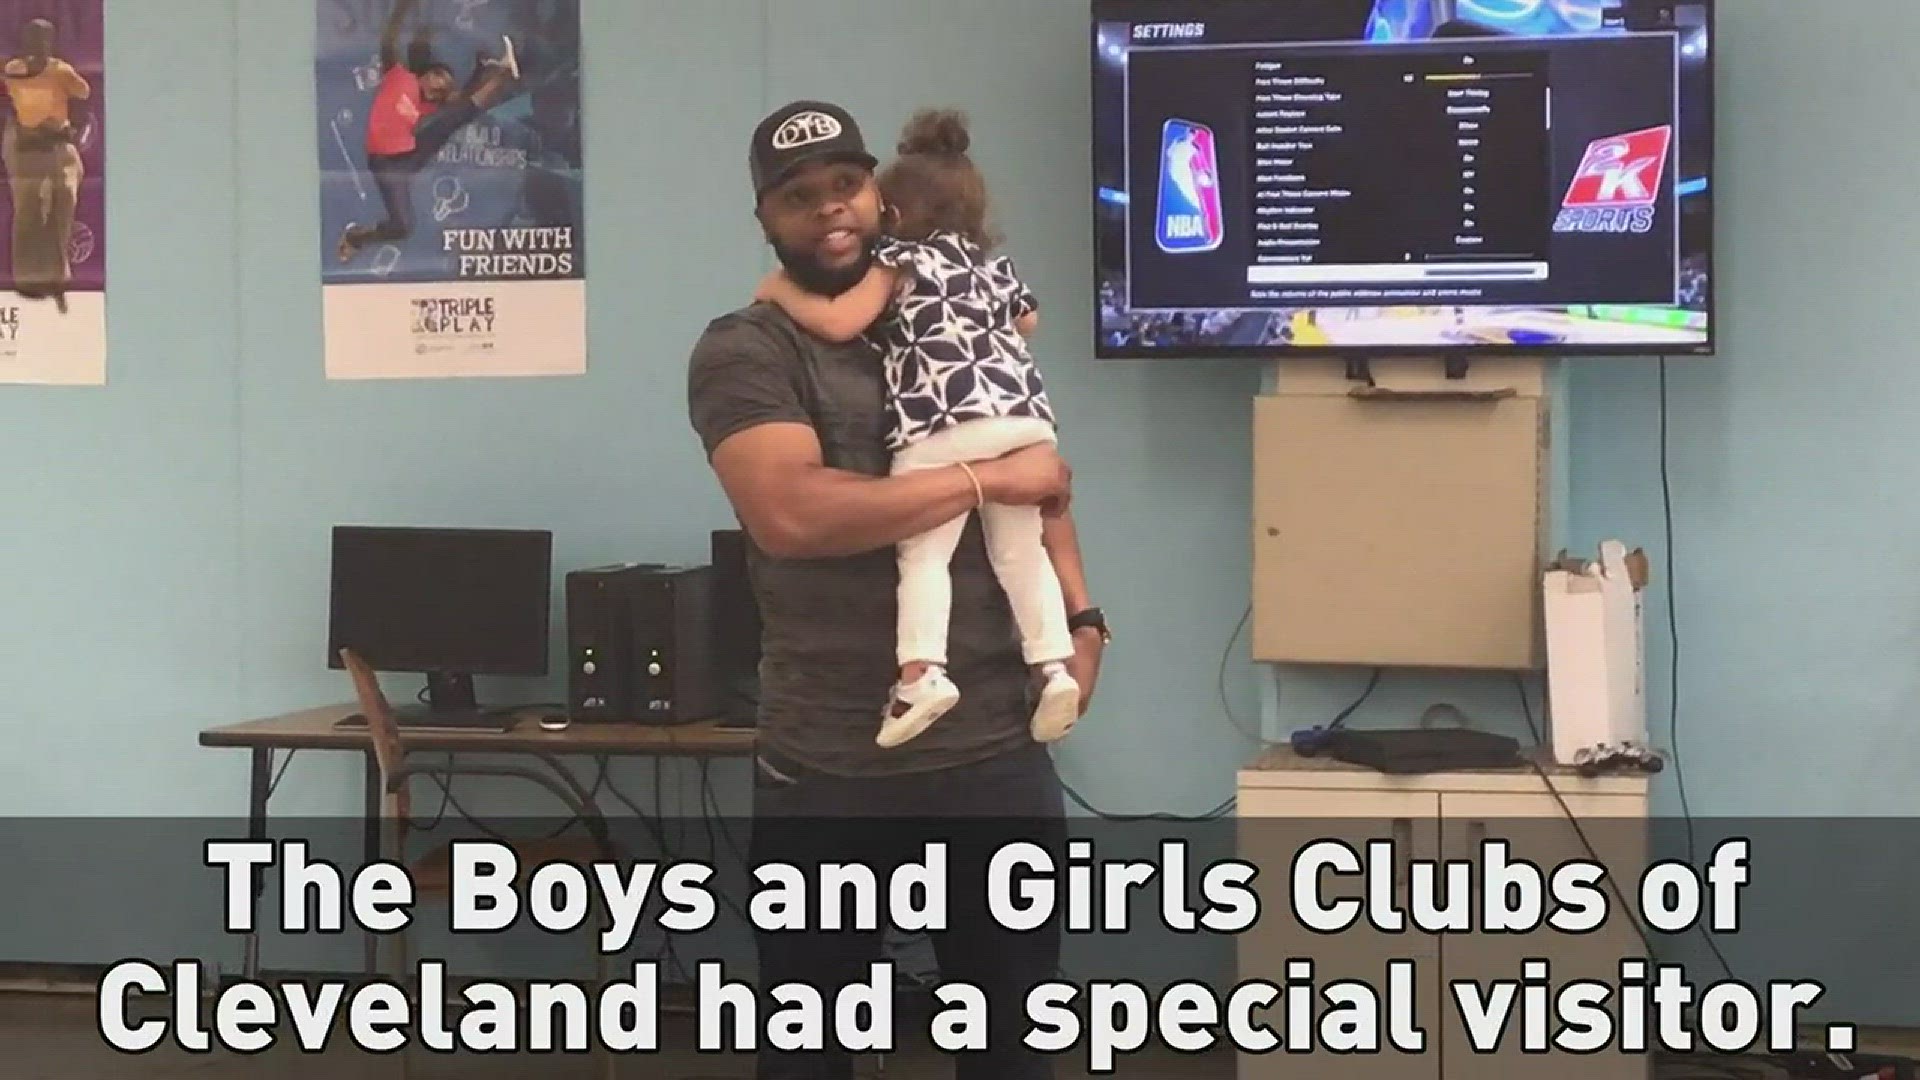 Cleveland Indians first baseman Carlos Santana visits the Boys and Girls Club of Cleveland.